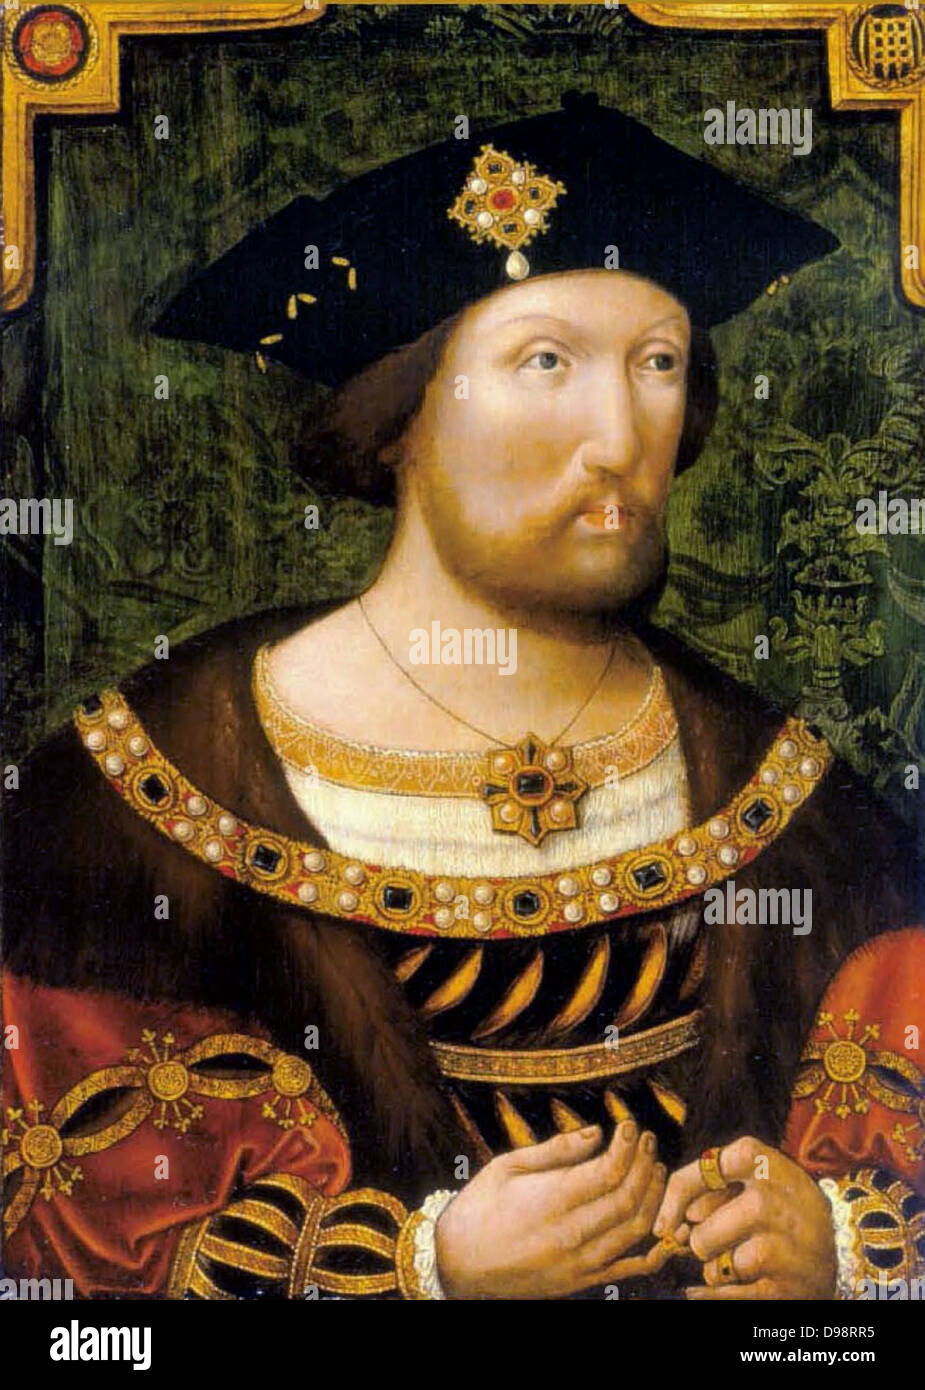 Henry VIII as a young man (by Holbein). Henry VIII (28 June 1491 – 28 January 1547) was King of England from 21 April 1509 until his death. He was Lord of Ireland (later King of Ireland) and claimant to the Kingdom of France. Henry was the second monarch of the House of Tudor, succeeding his father, Henry VII. Stock Photo